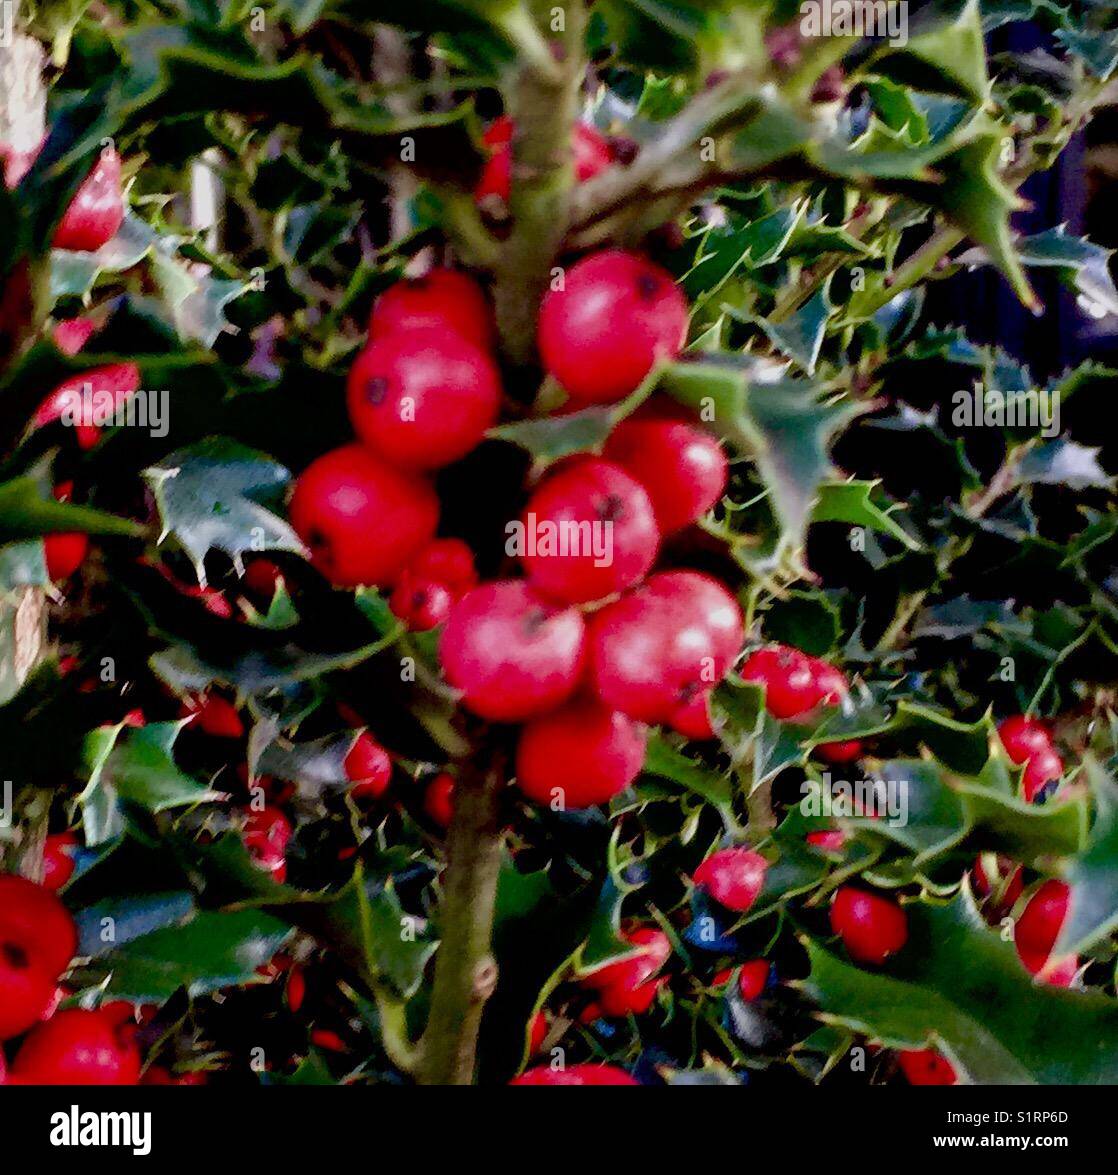 Ruby Red Holly Berries and Iconic Bright Green Holly Leaves Stock Photo